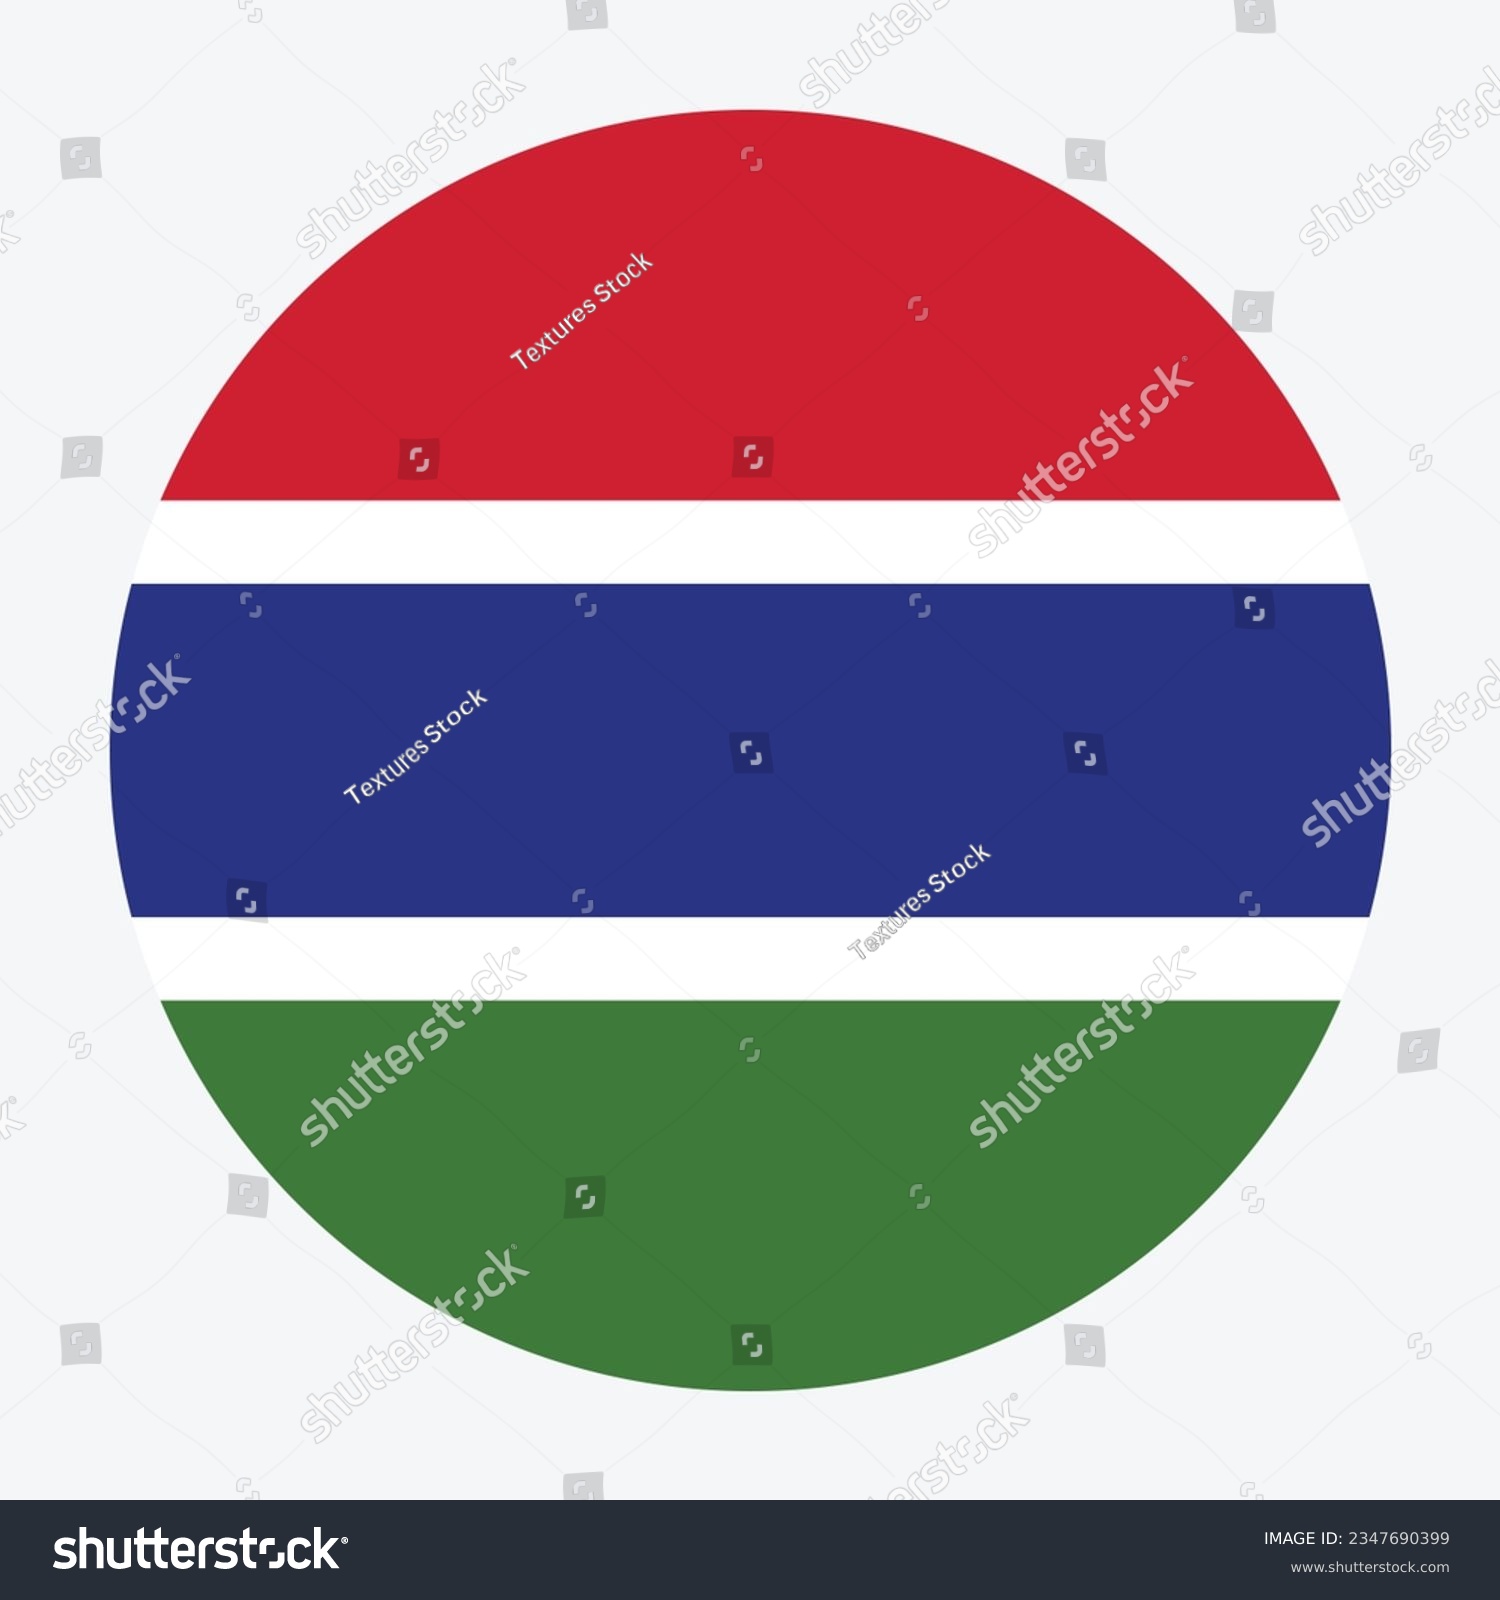 SVG of Flag of the Gambia. Flag icon. Standard color. Circle icon flag. Computer illustration. Digital illustration. Vector illustration. svg